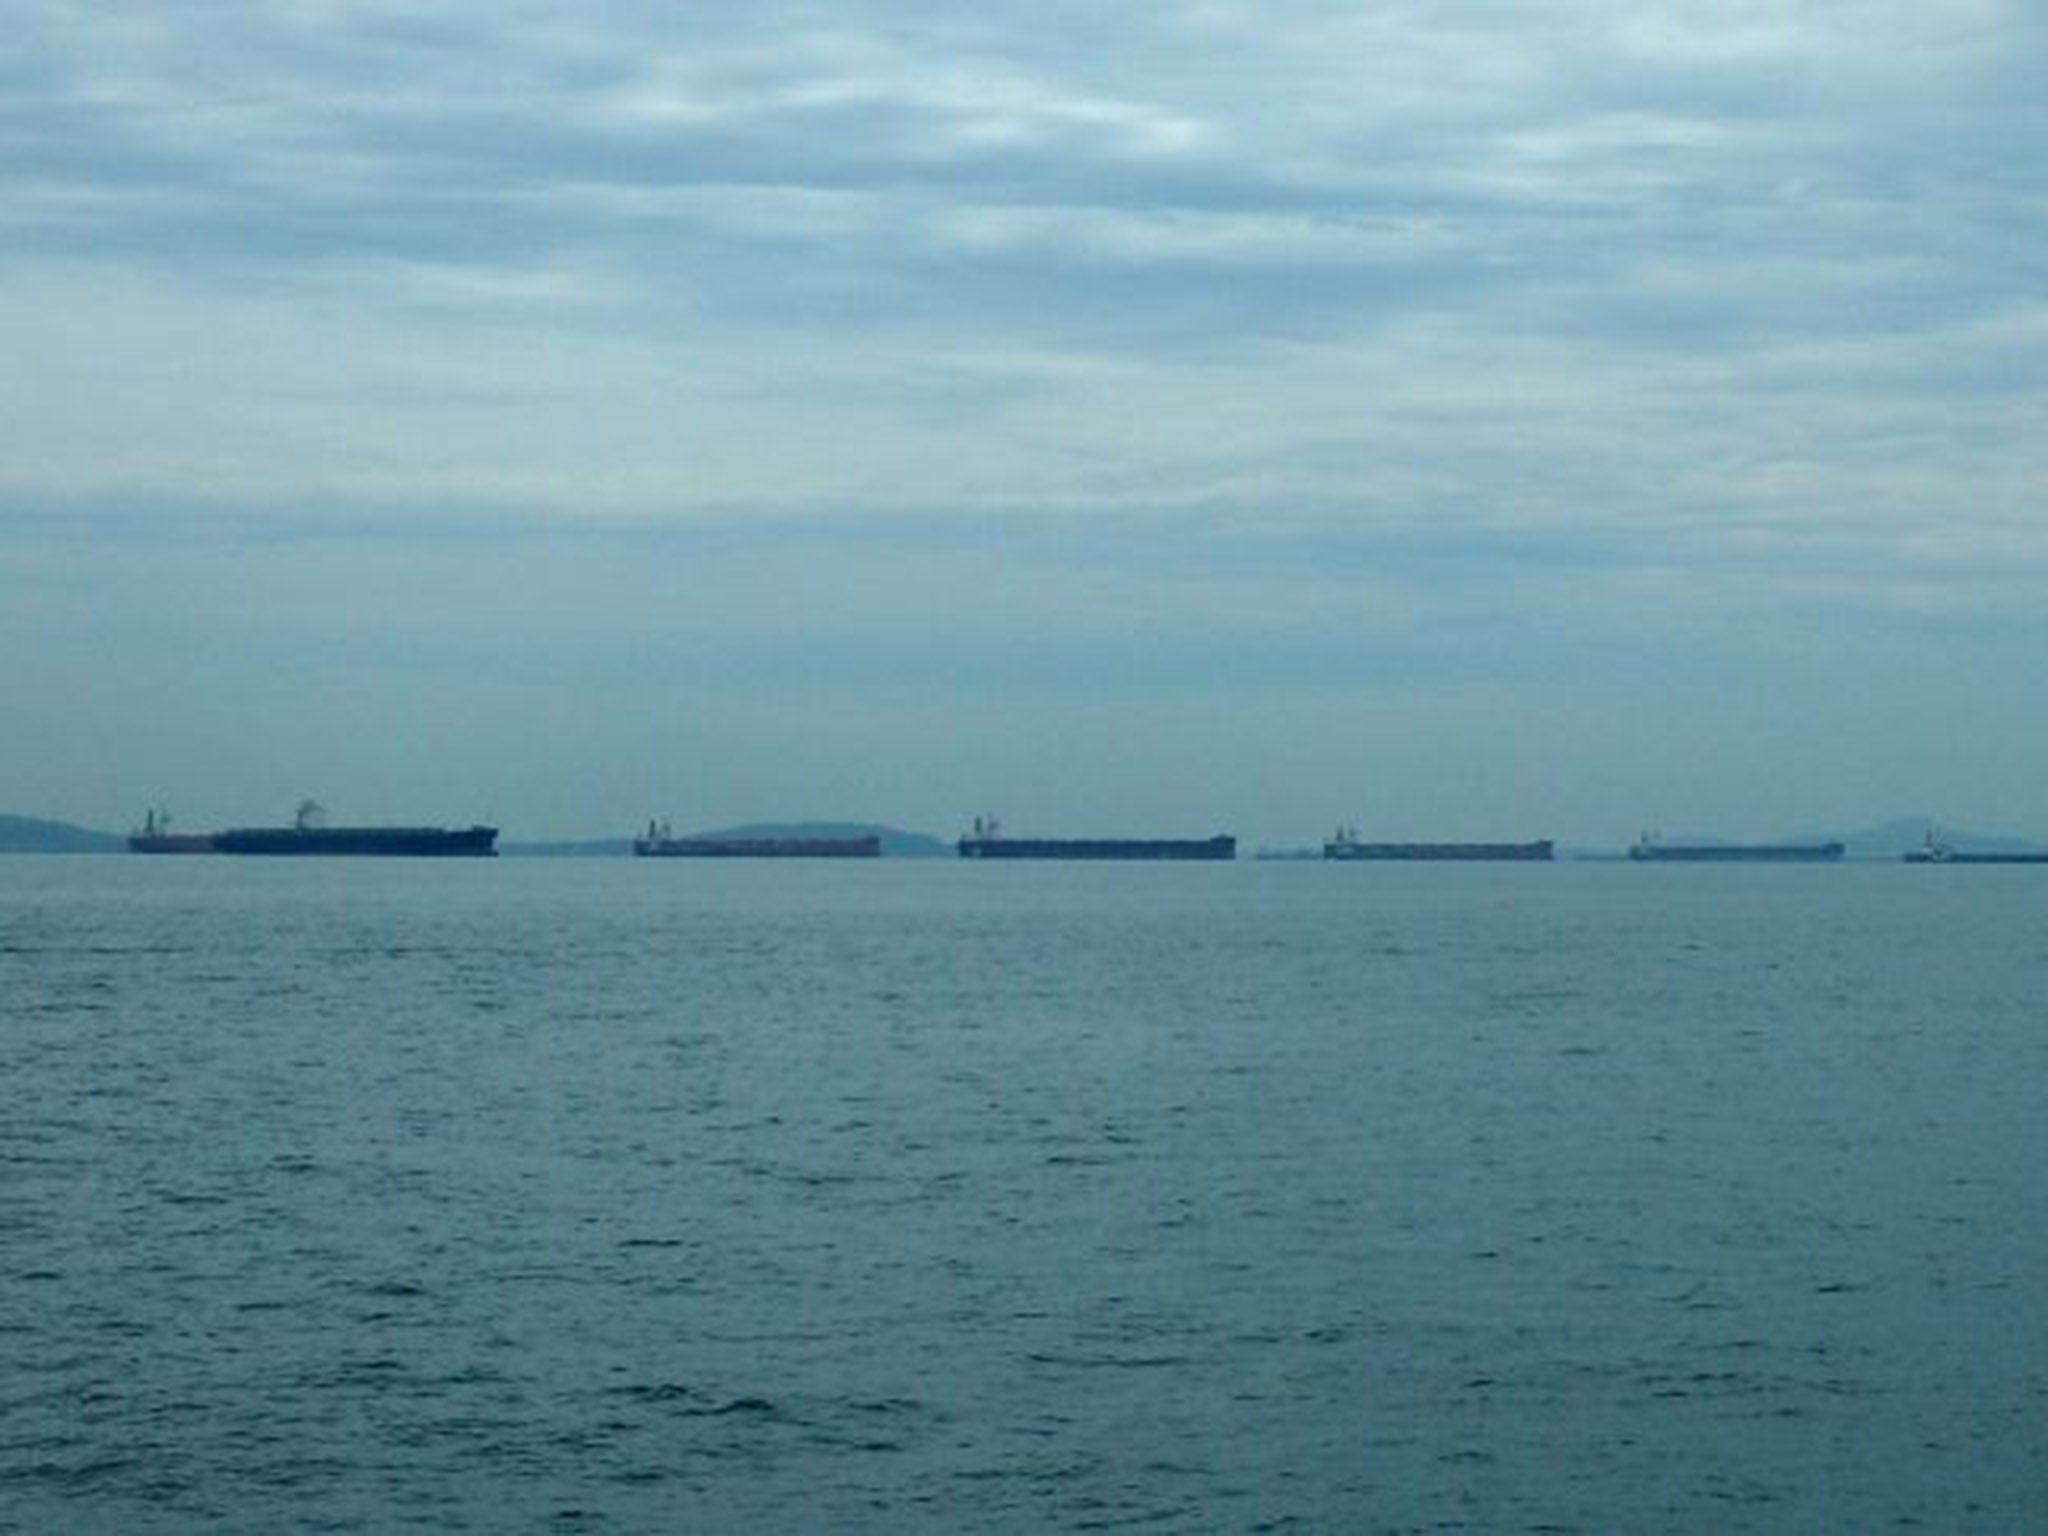 Tankers in the Strait of Singapore. Despite the hijacking a report on the region says the number of piracy incidents is actually going down